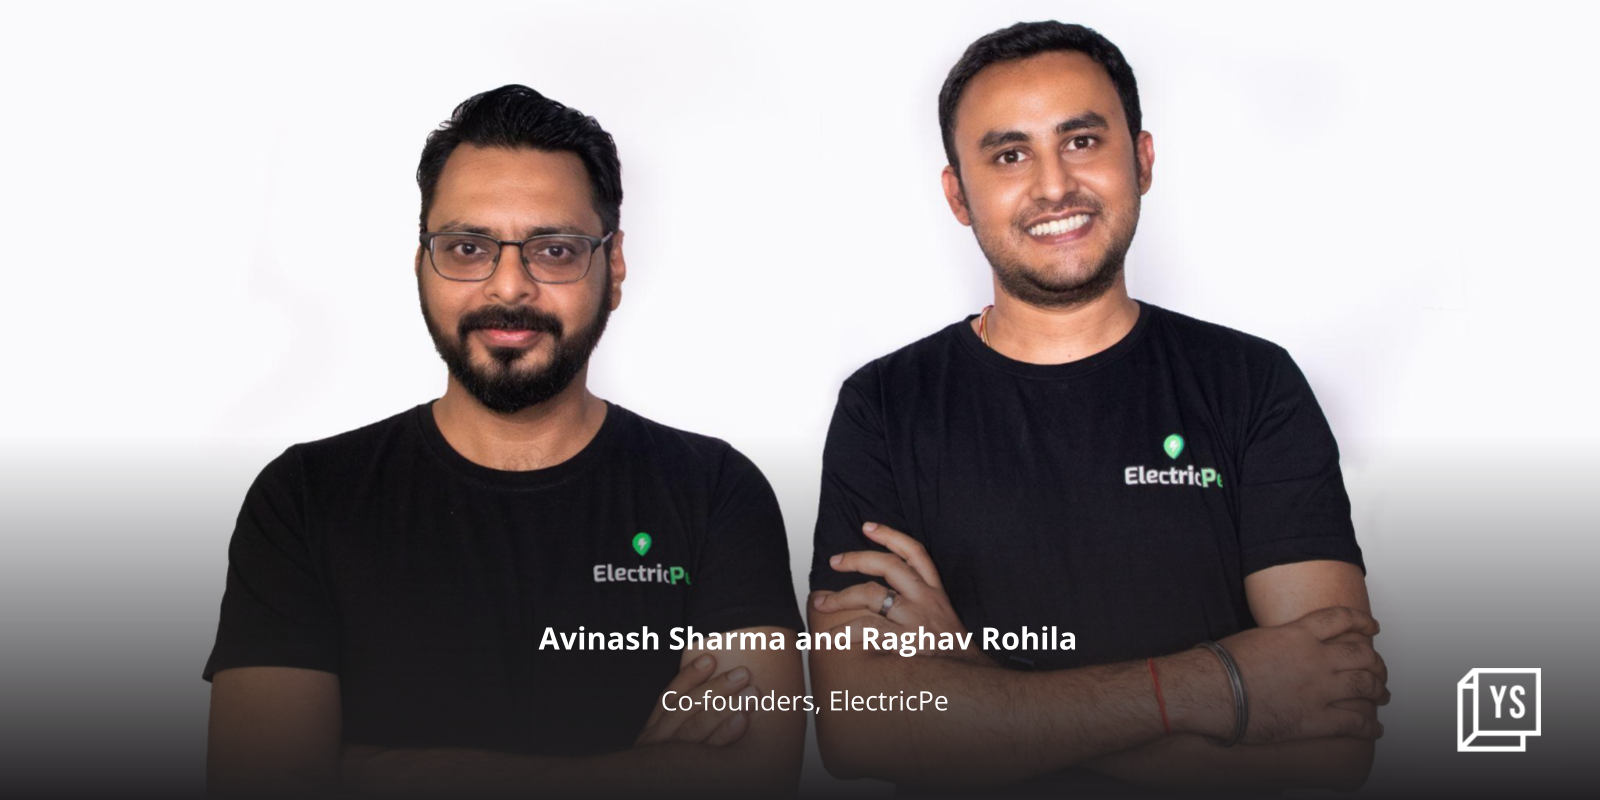 ElectricPe raises $5M in funding round led by Green Frontier Capital, Blume Ventures, Micelio Fund